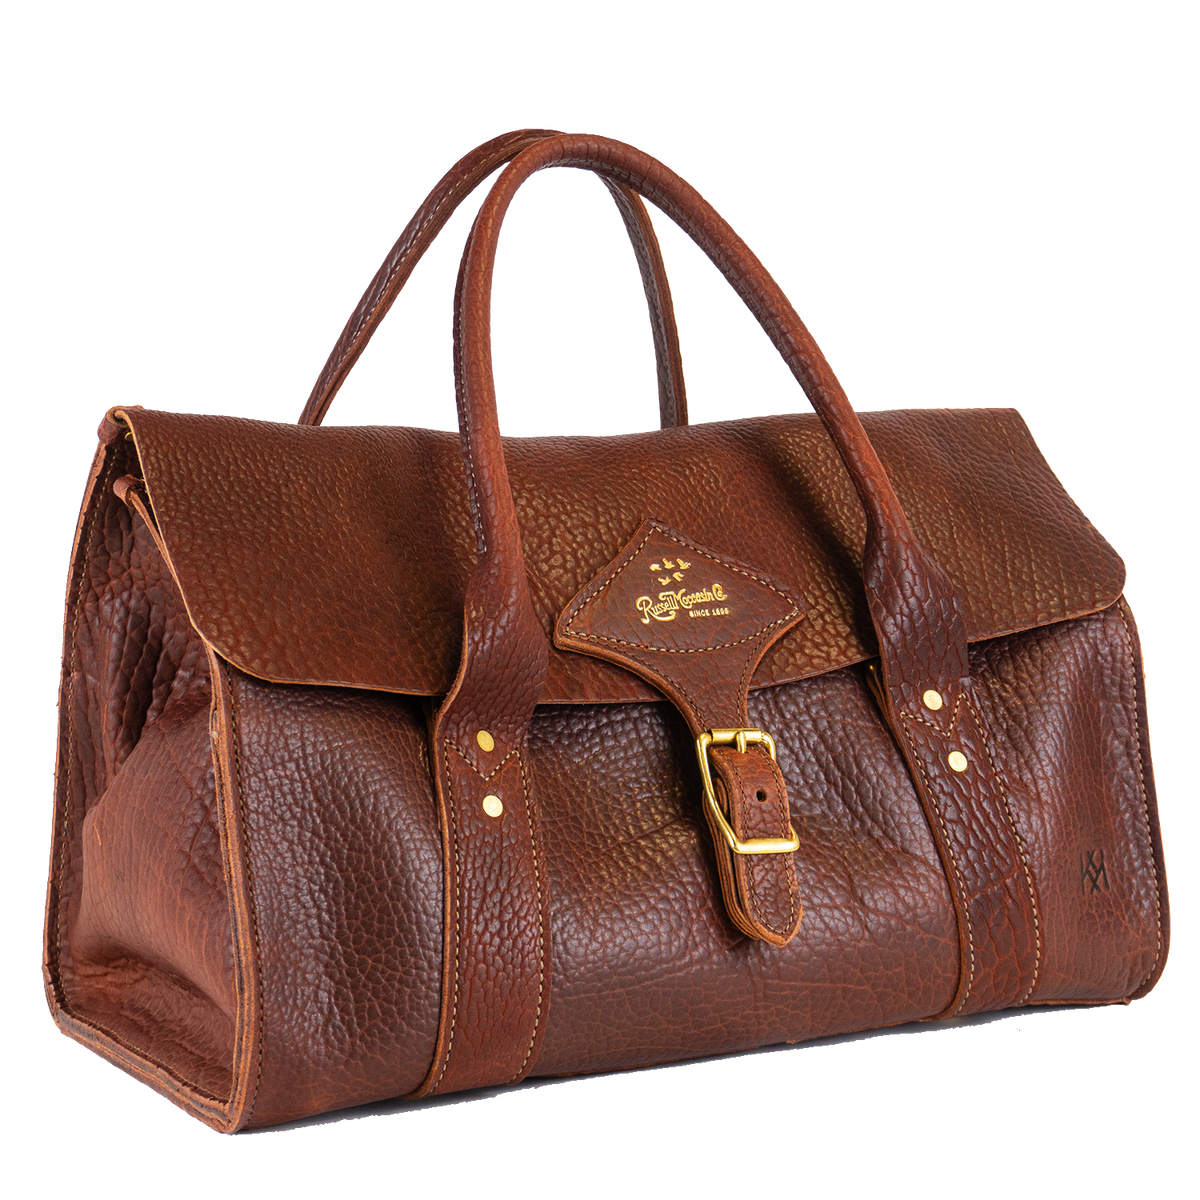 Russell X Kingfisher Weekend Bag